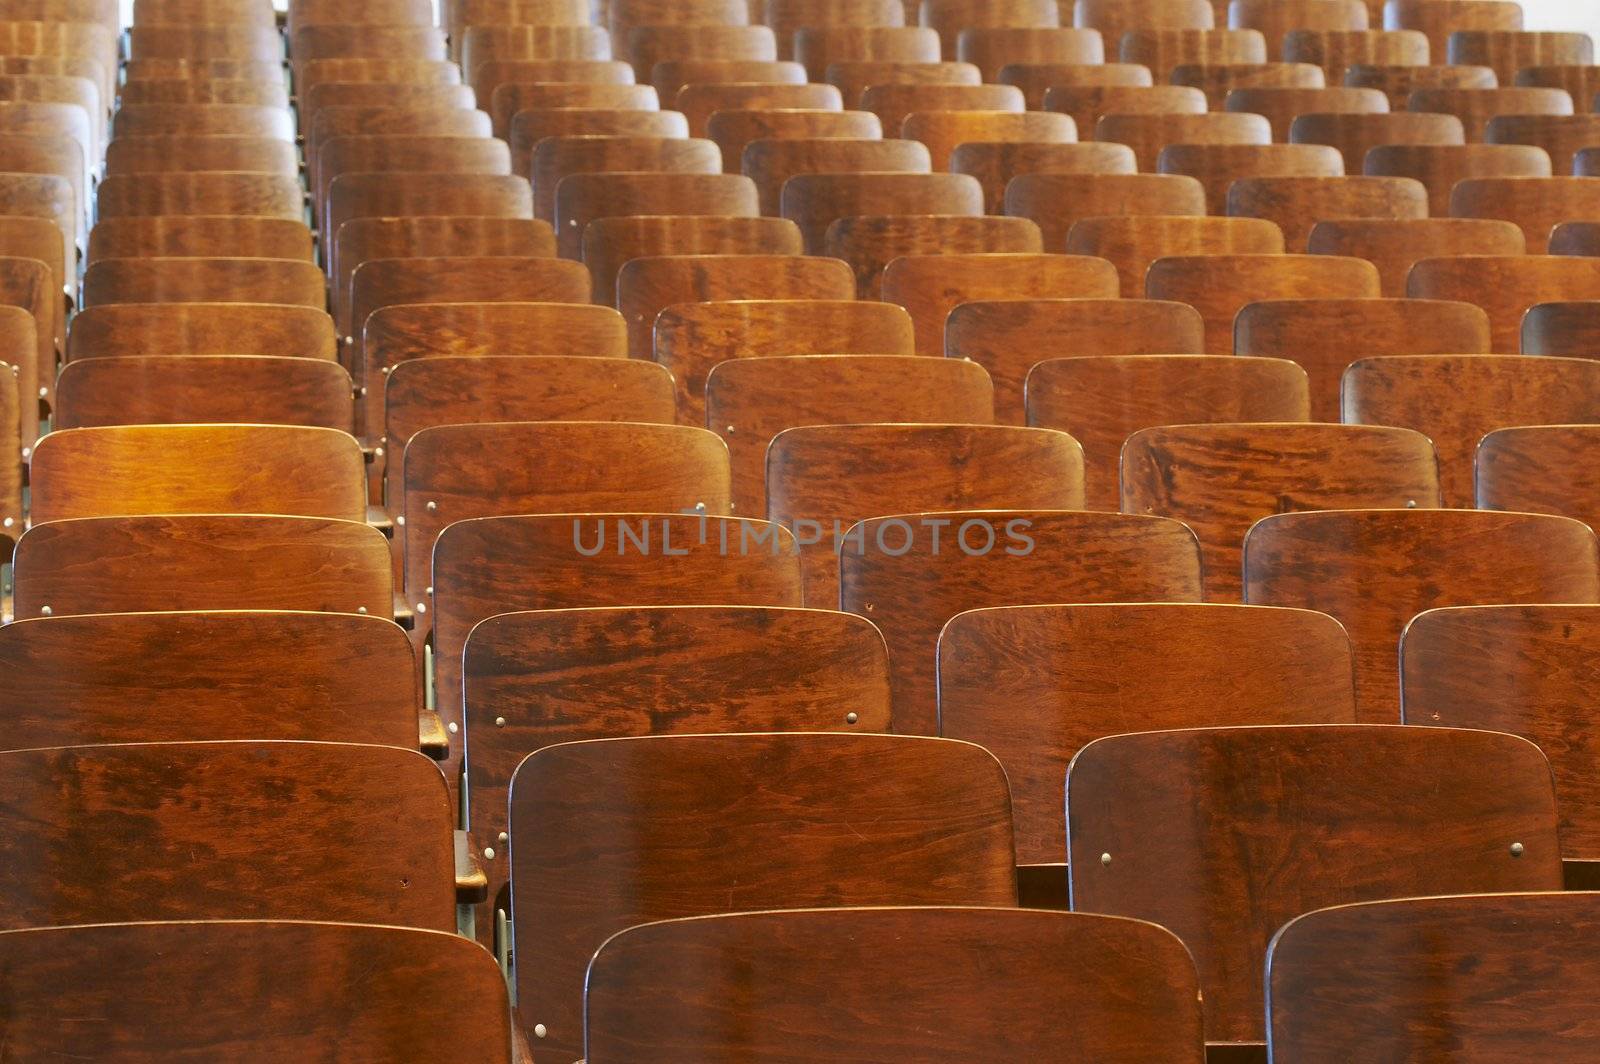 rows of wood chairs in an old auditorium